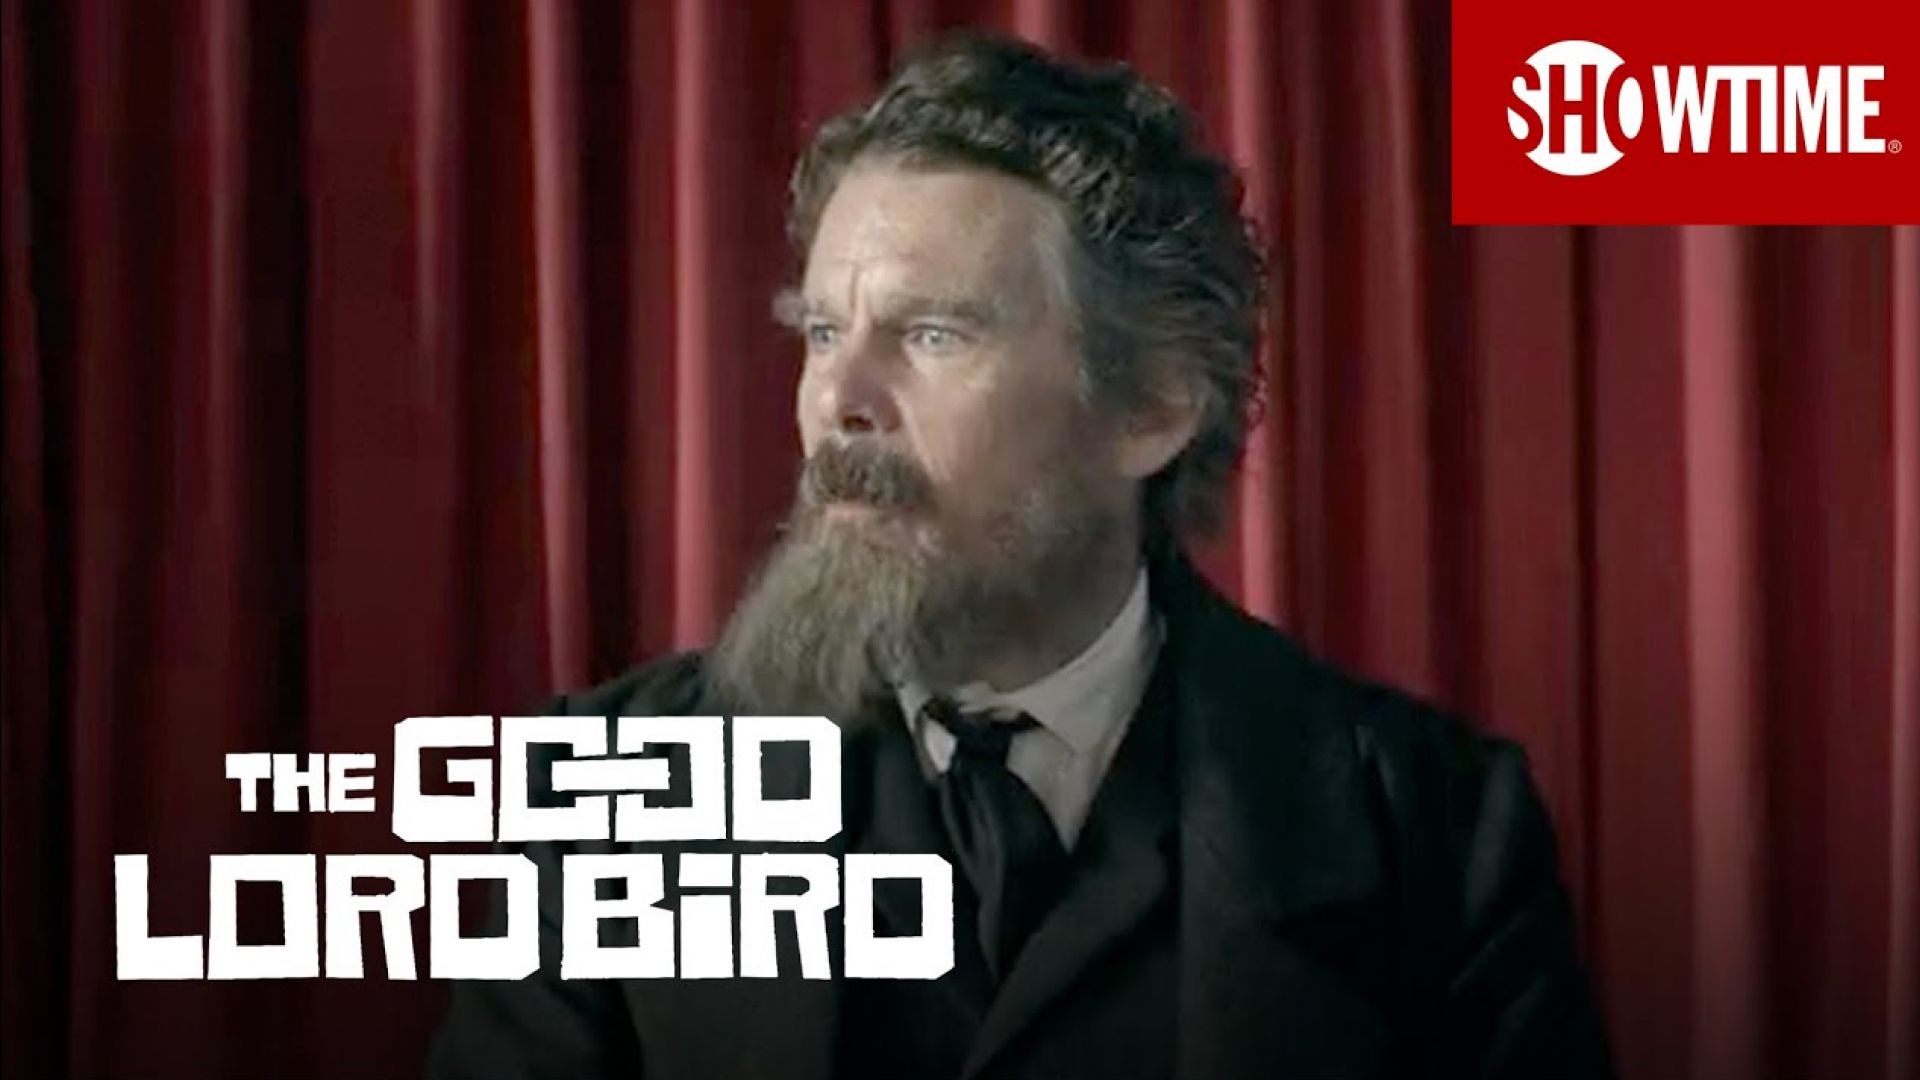 &#039;The Good Lord Bird&#039; teaser with Ethan Hawke (October 4, Sho